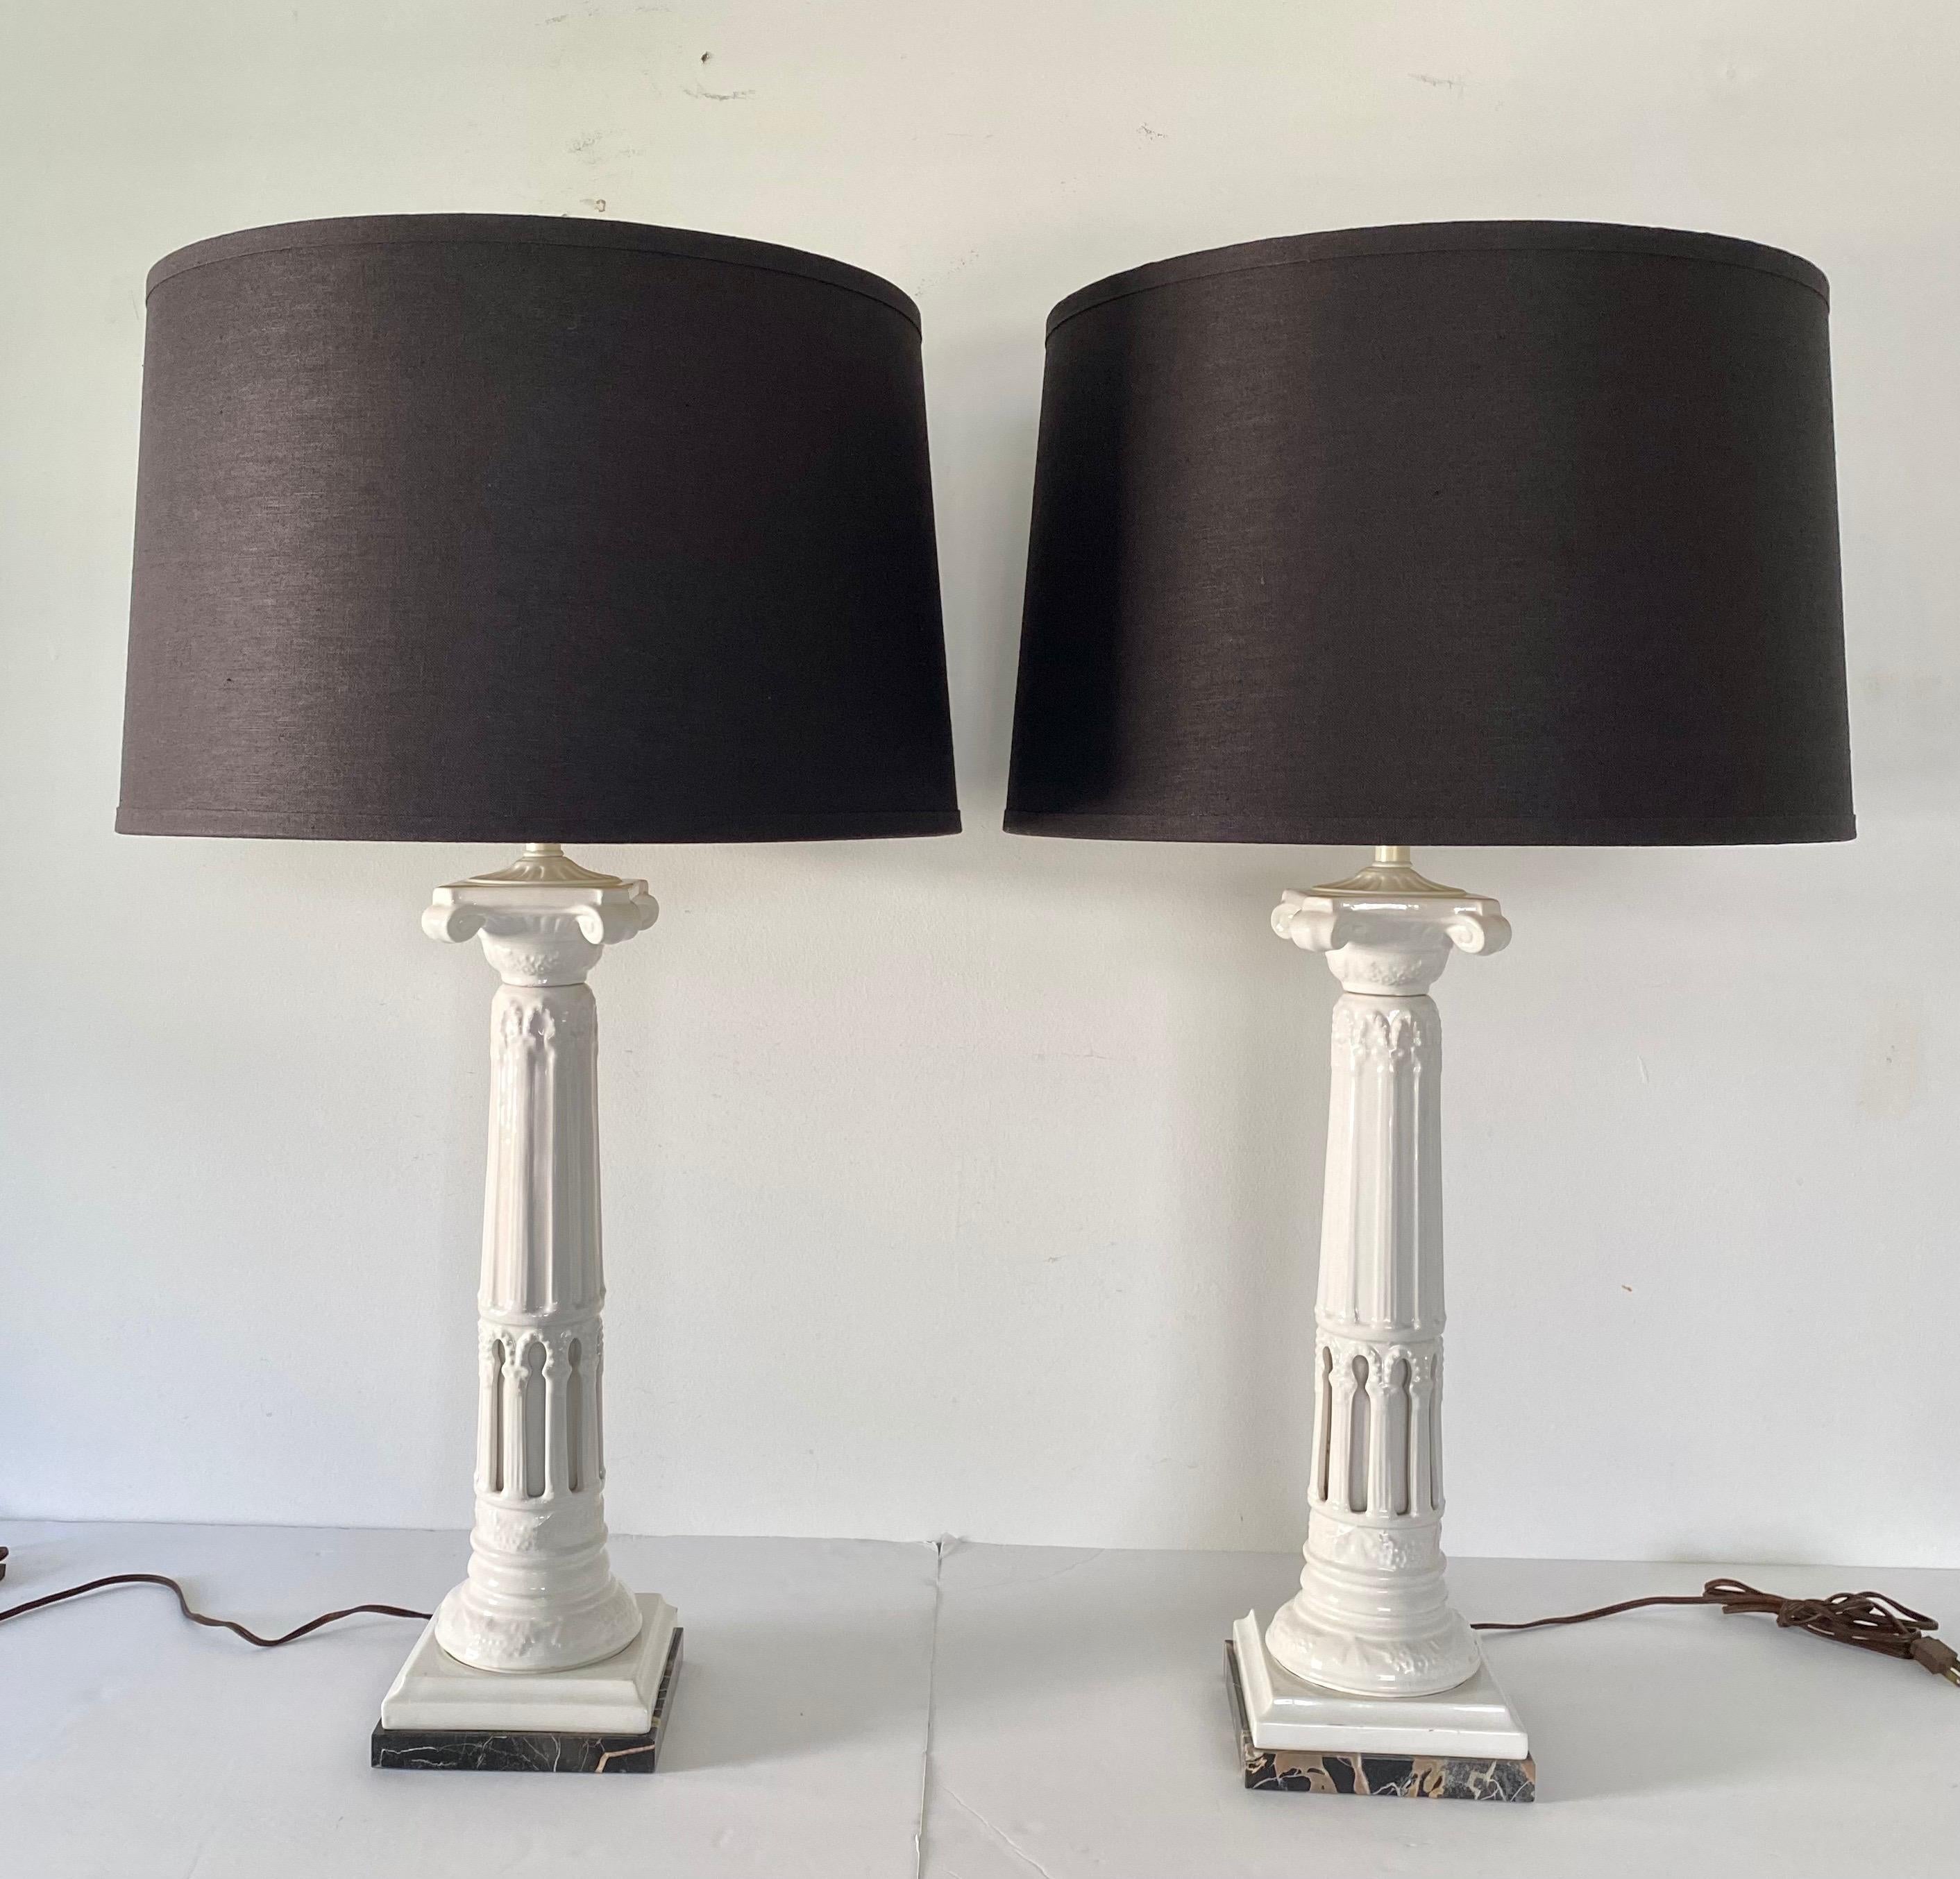 Pair of tall Neoclassical style ceramic fluted column table lamps mounted on black and brown veined marble plinth bases. These sculptural columnar form lamps feature a gloss white glaze with draped garland reliefs and dimensional cut-outs. Lamp